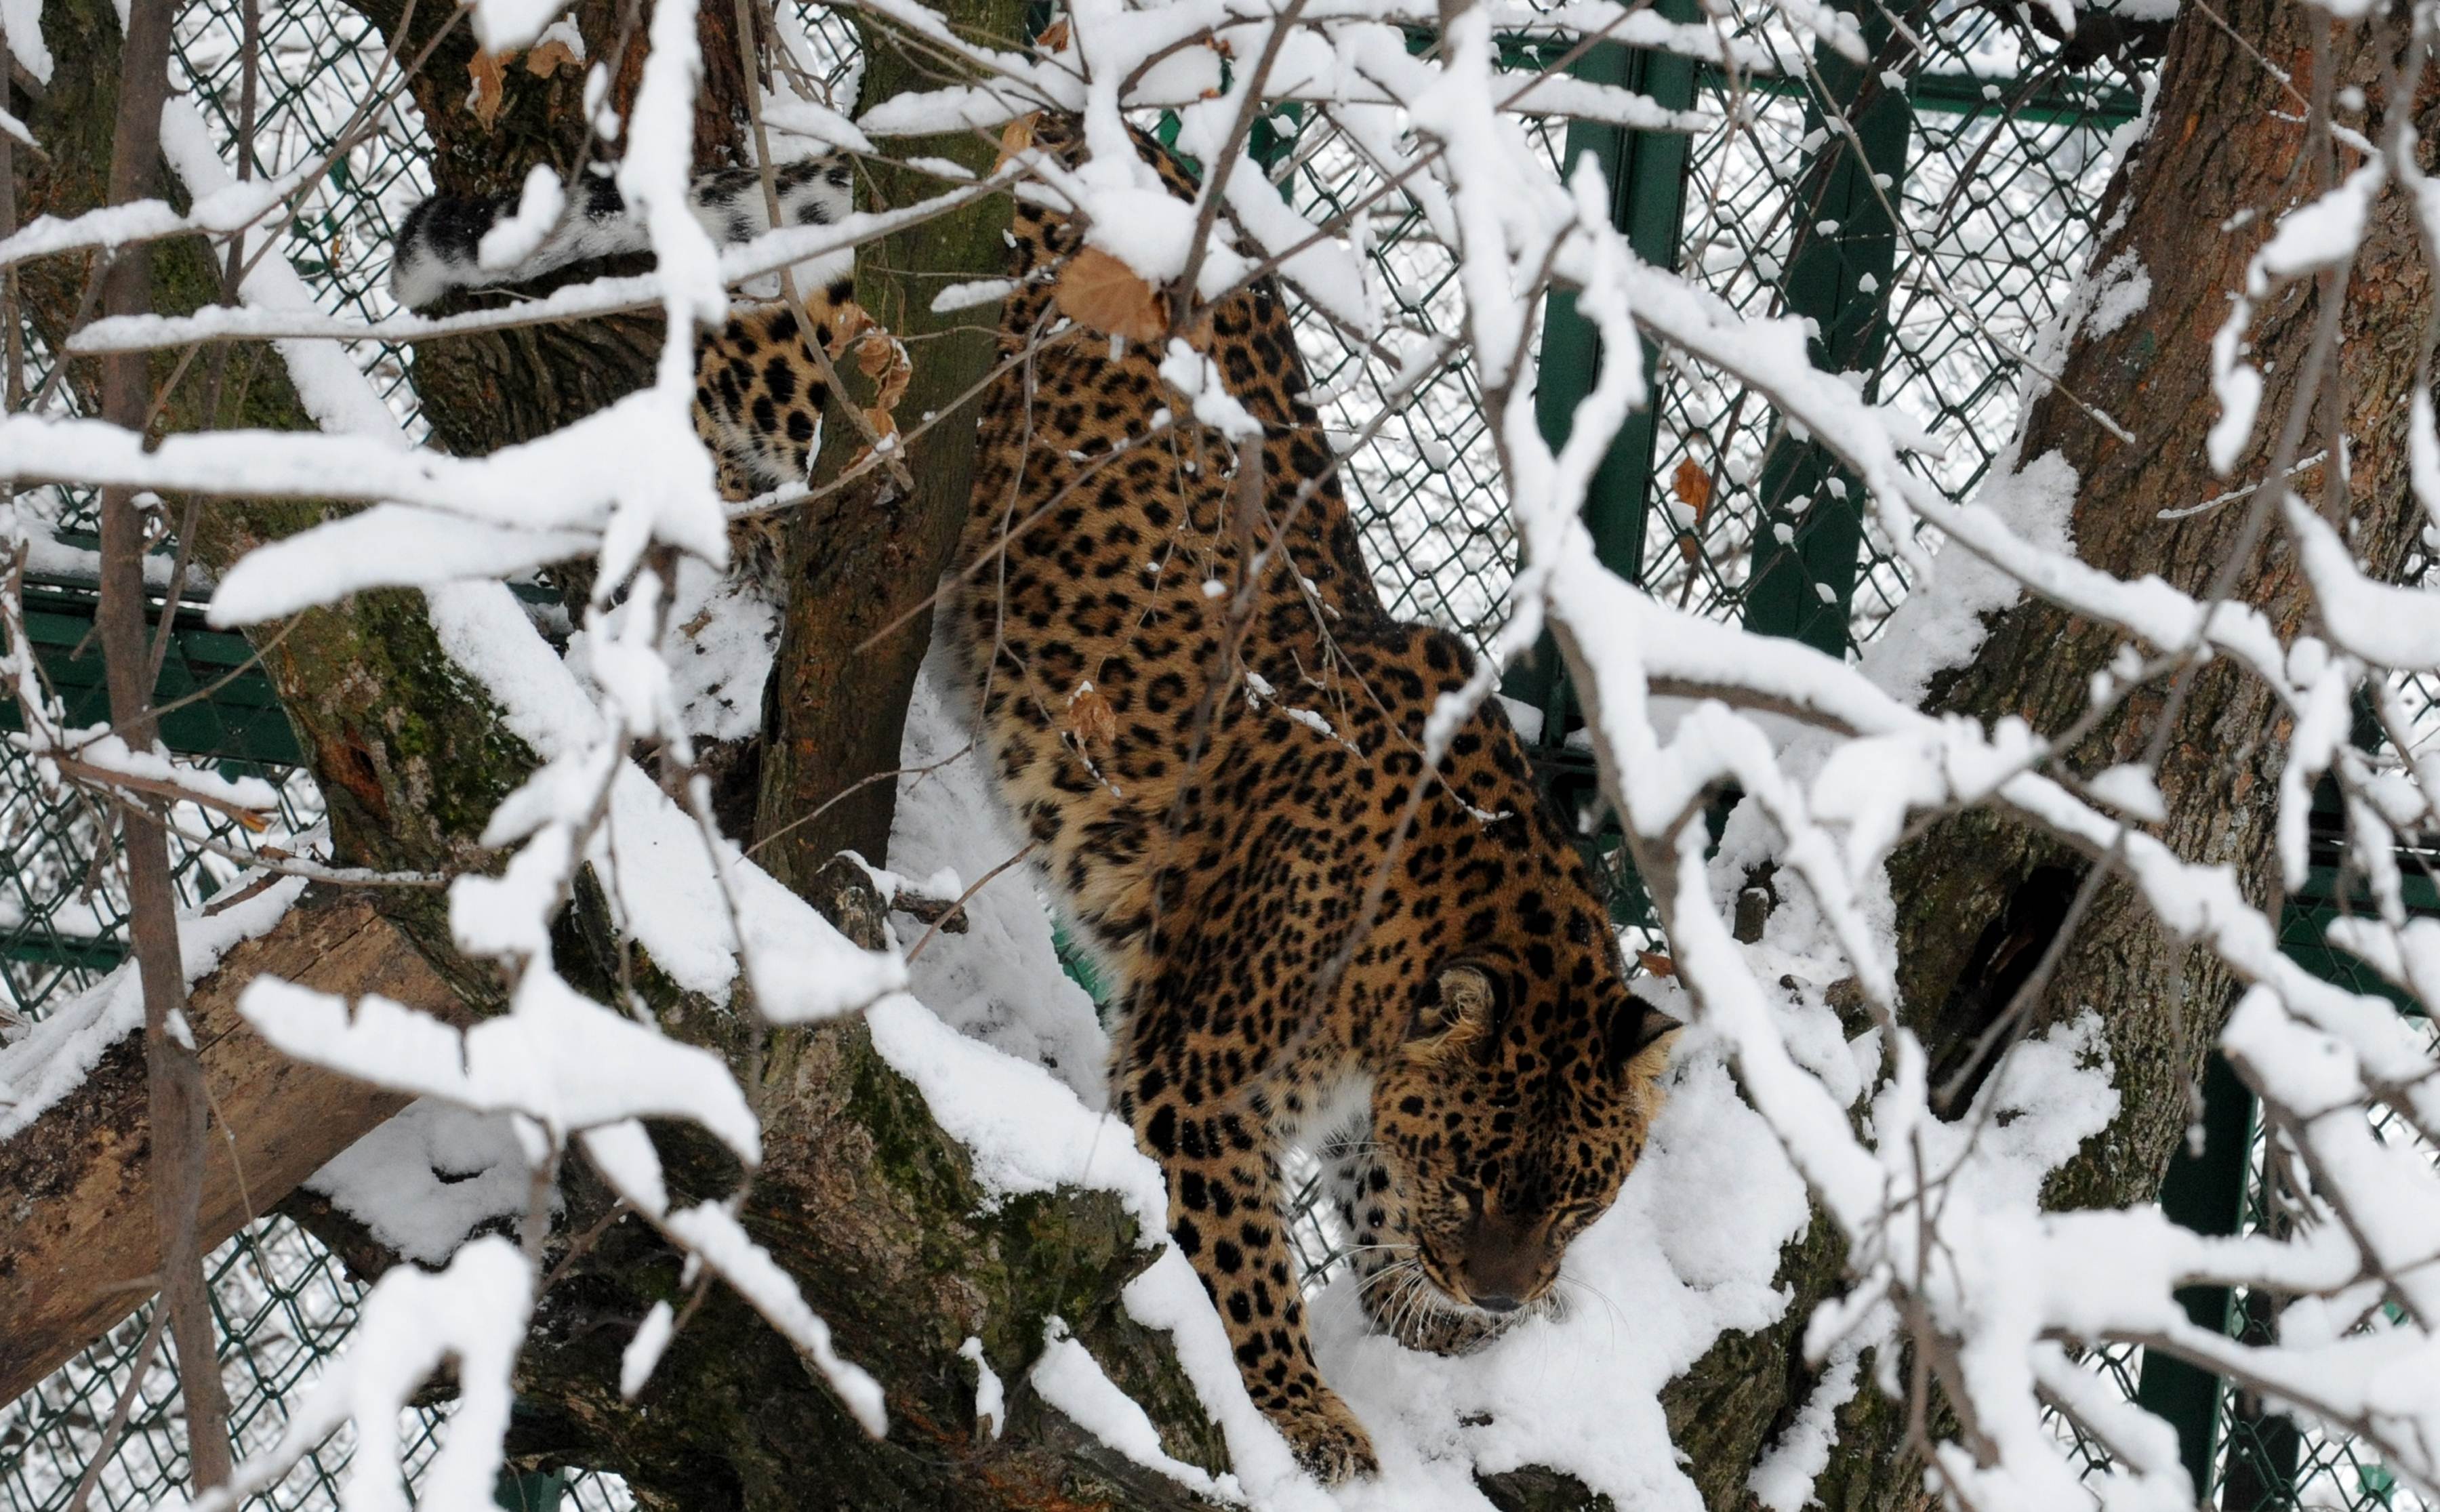 The four-year-old girl, suspected to have been killed by a leopard, went missing from her lawn in Budgam district of Kashmir